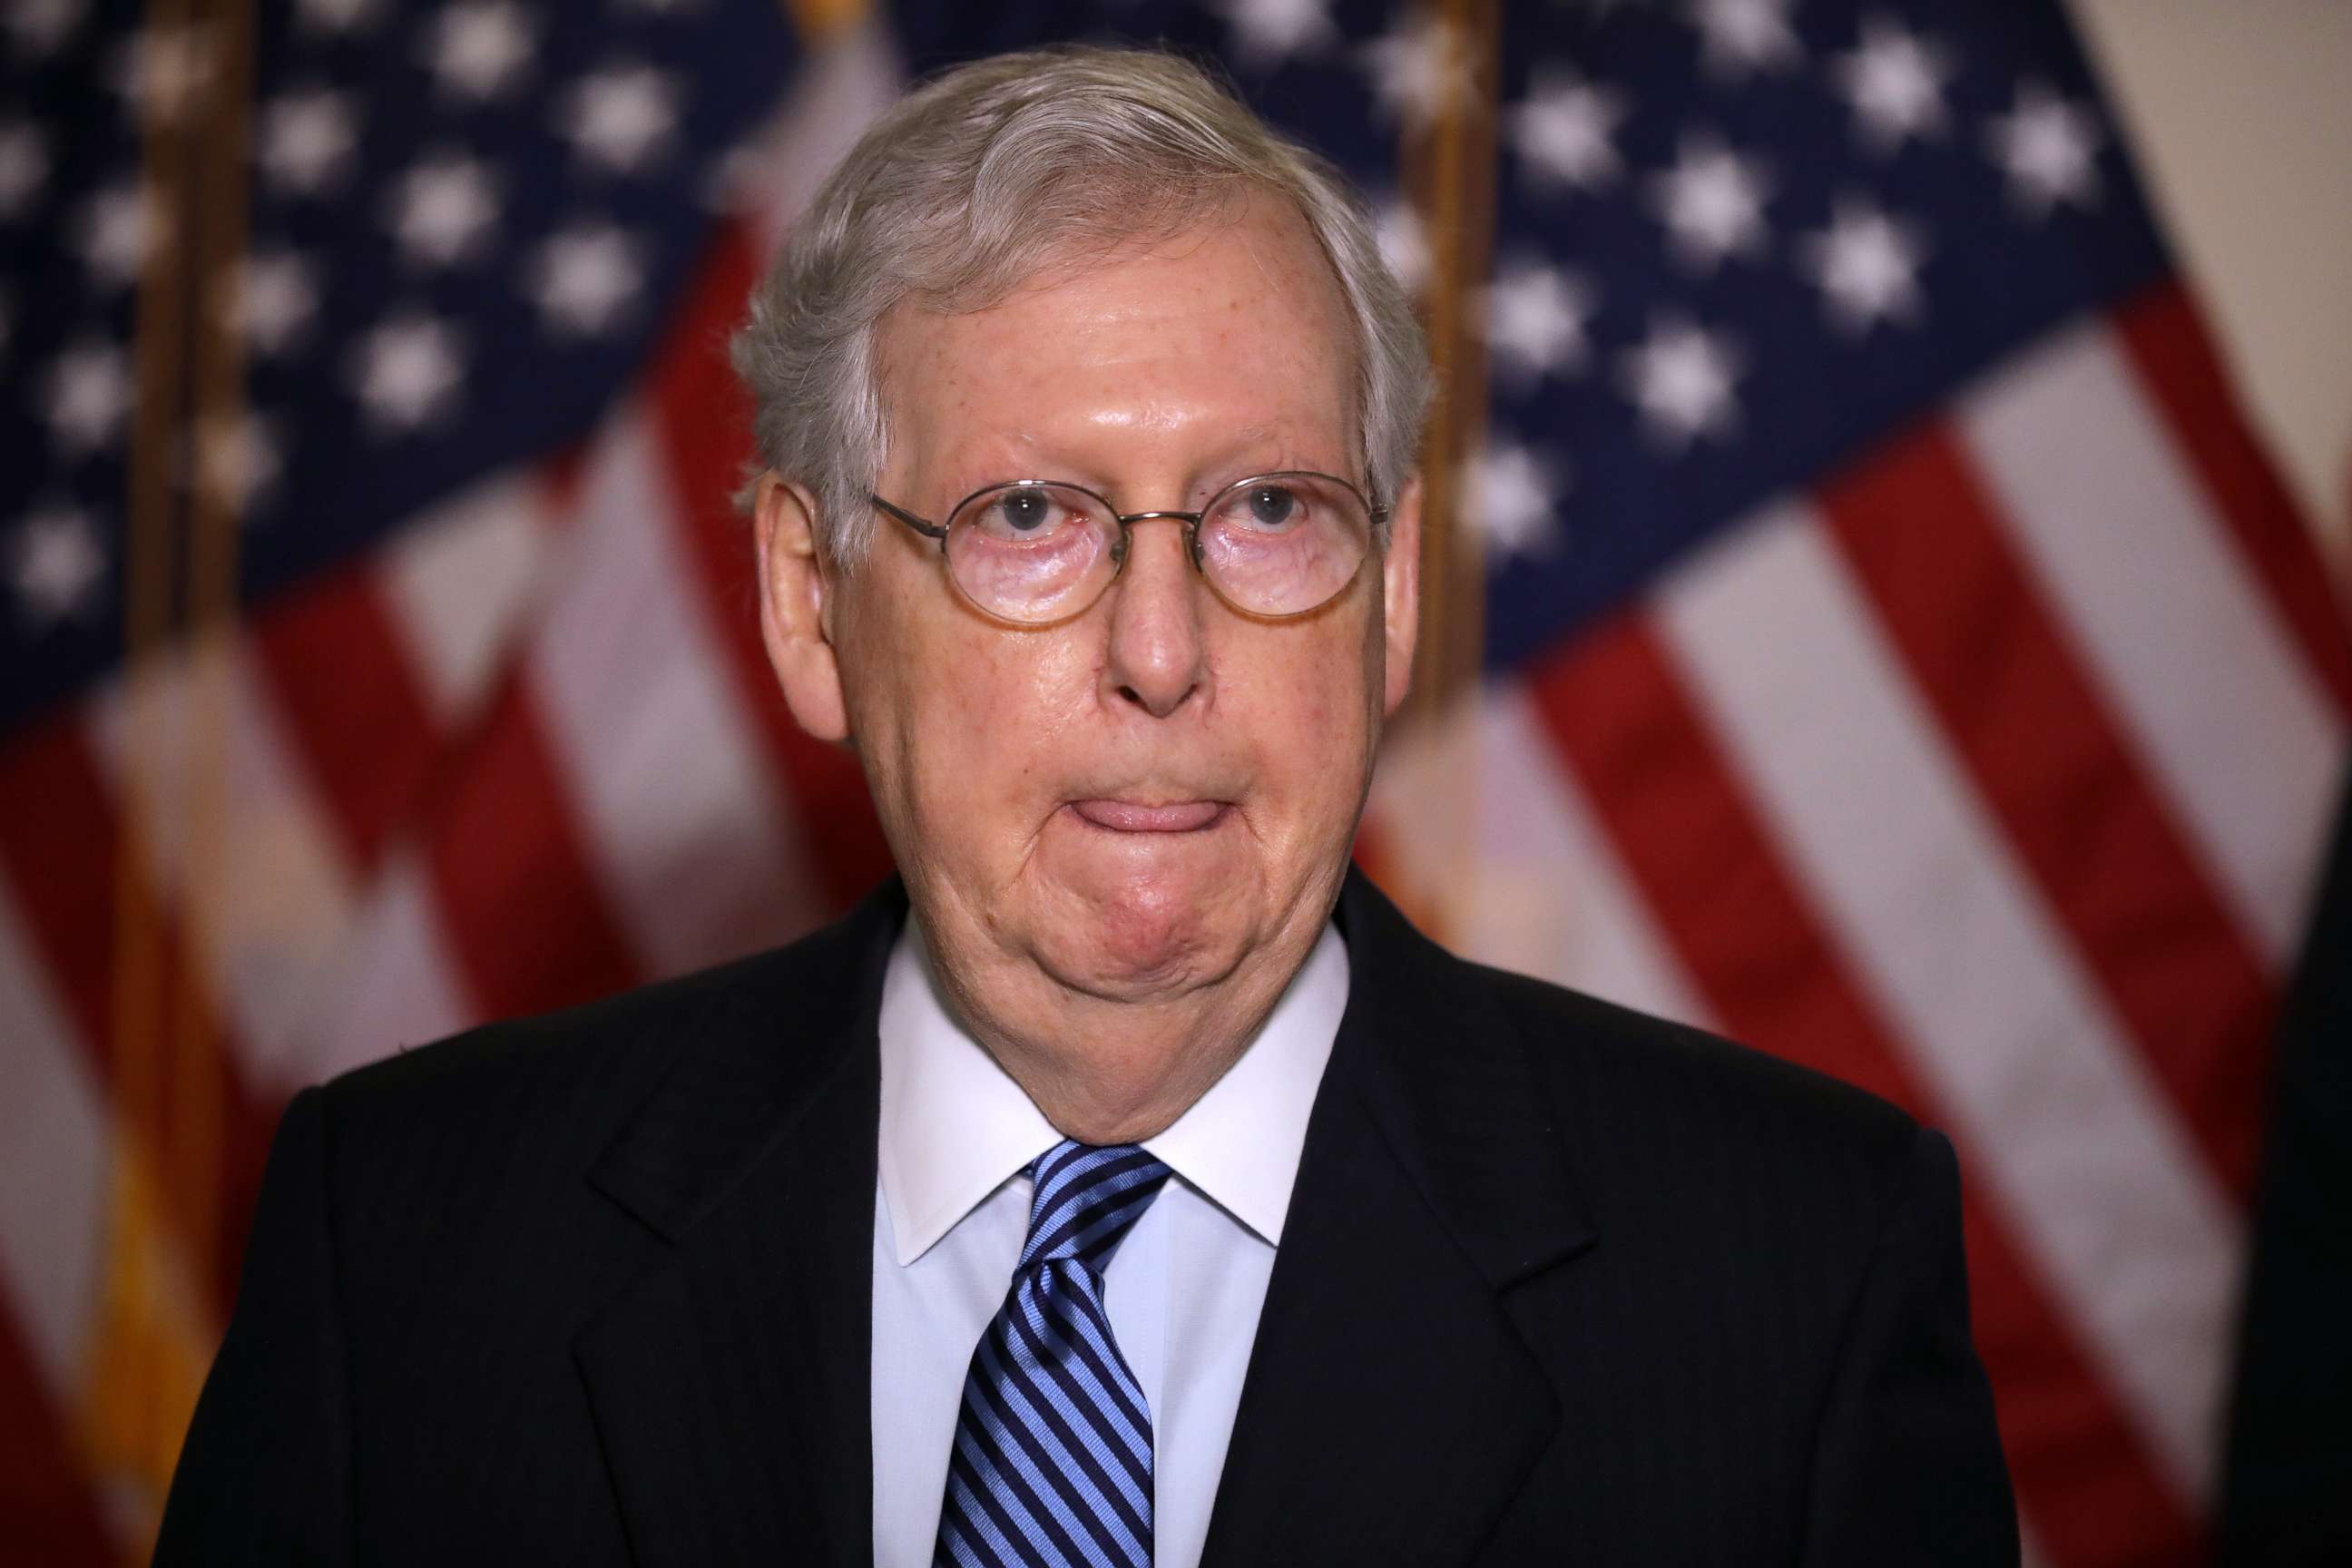 PHOTO: Senate Majority Leader Mitch McConnell, R-Ky., talks to reporters following the weekly Republican policy luncheon in the Hart Senate Office Building on Capitol Hill, Sept. 15, 2020 in Washington, D.C. 